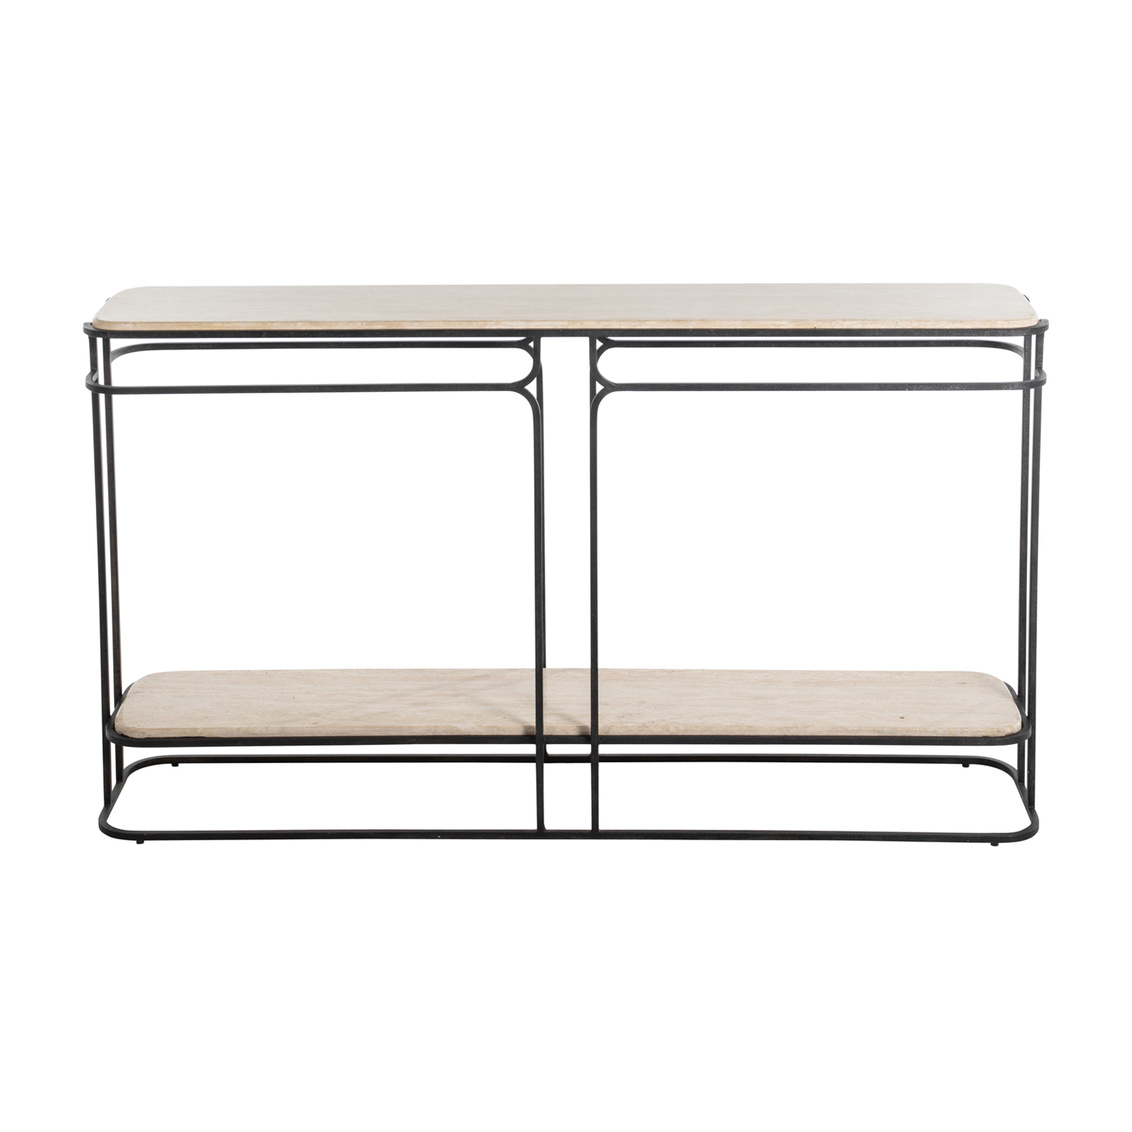 Thelma Console Table-$2,225.00